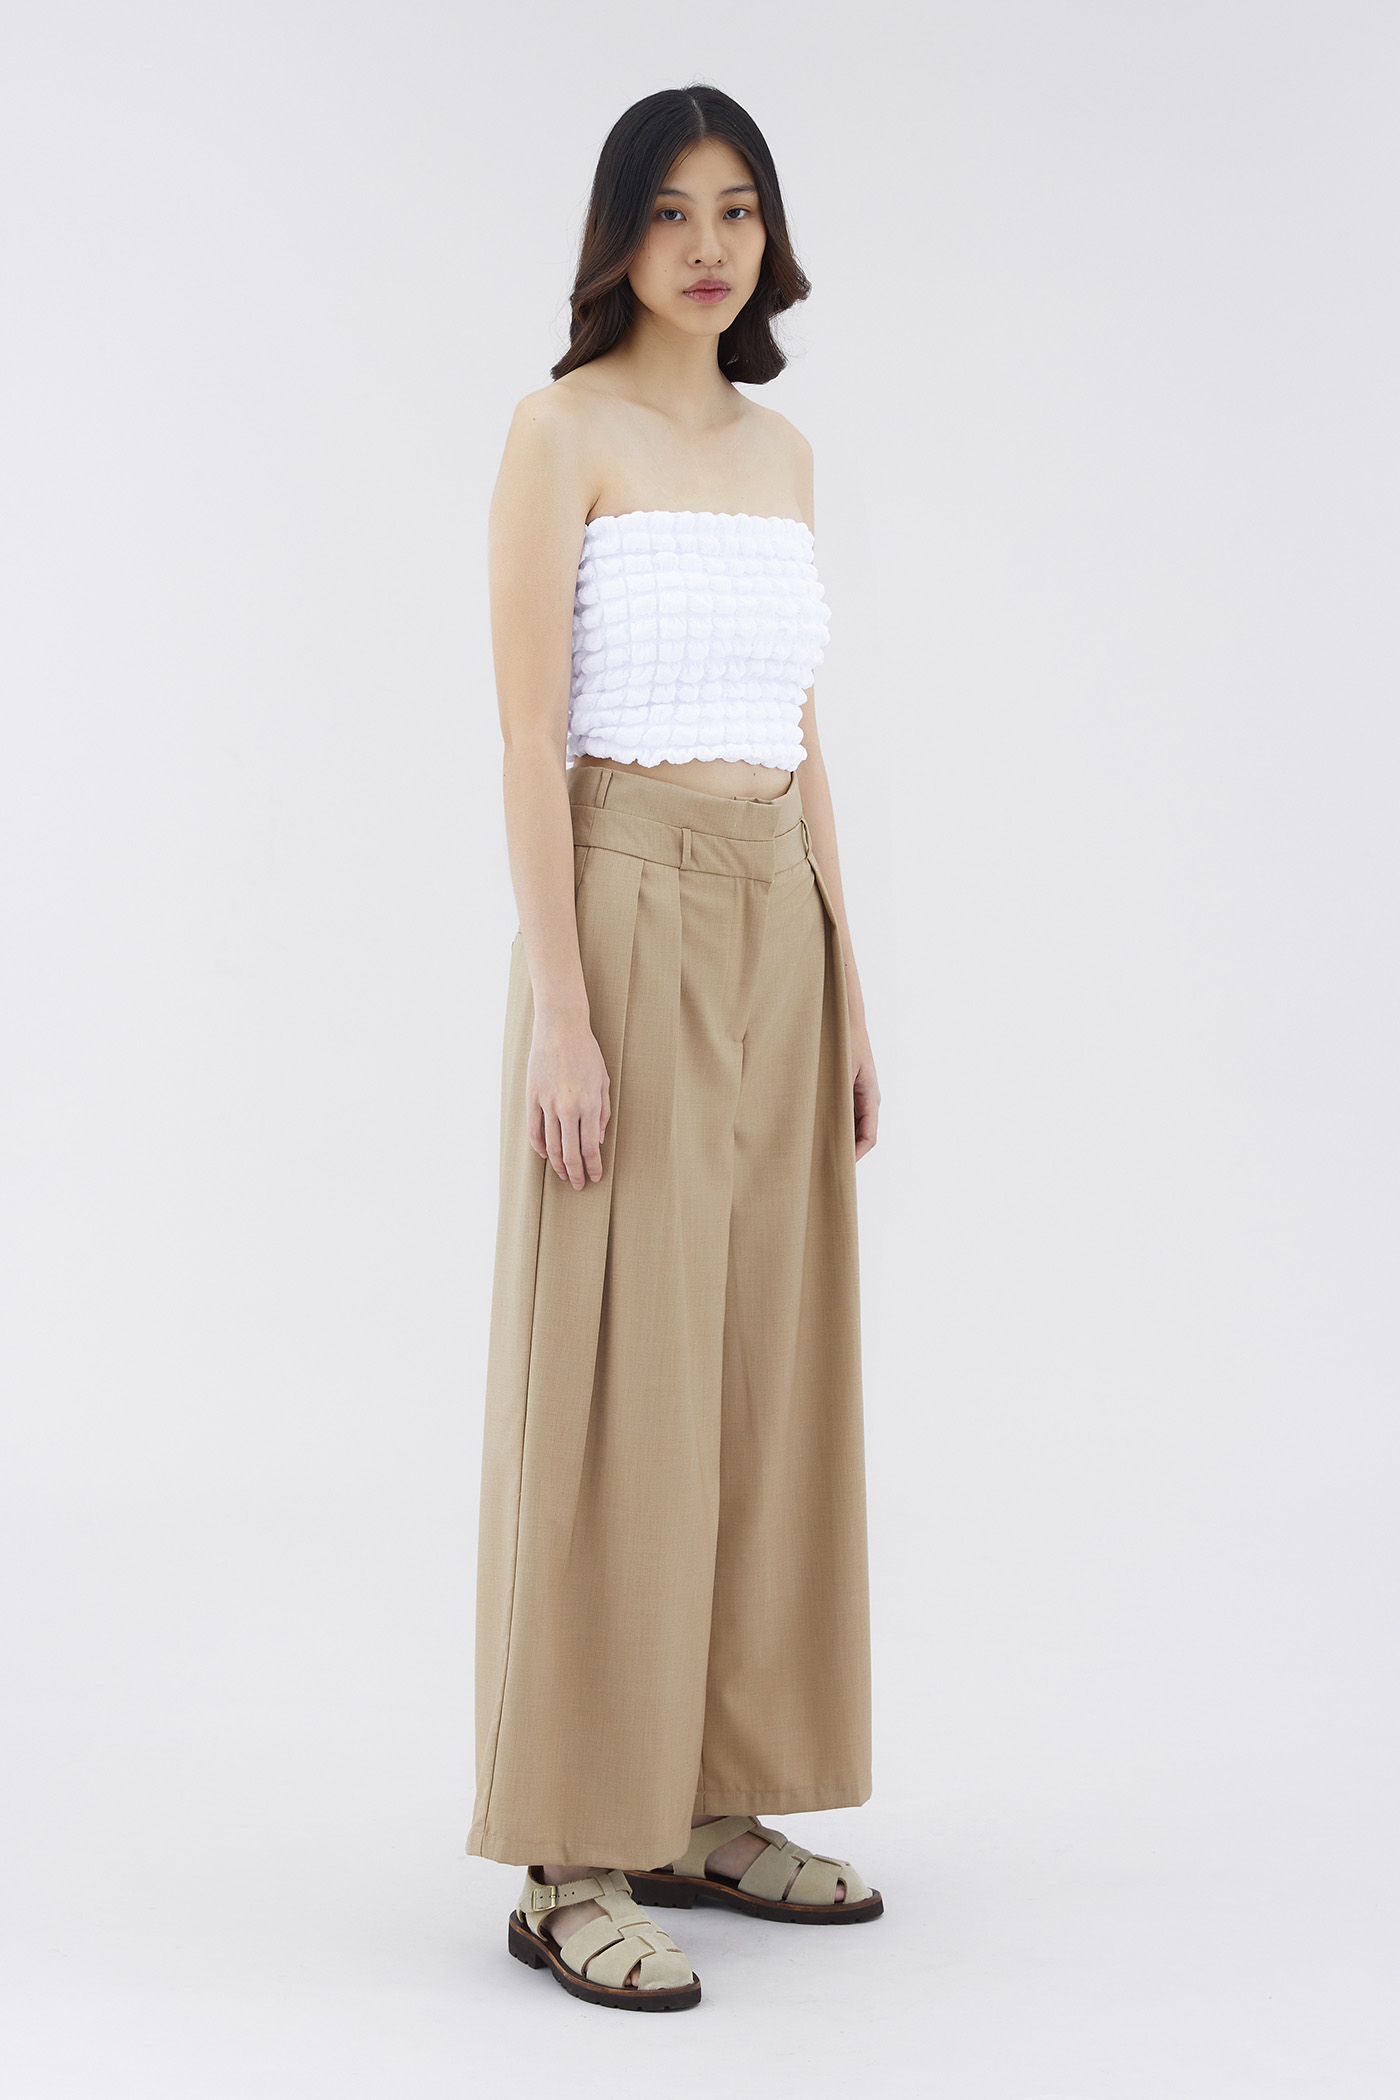 Poccu Textured Tube Top | The Editor's Market